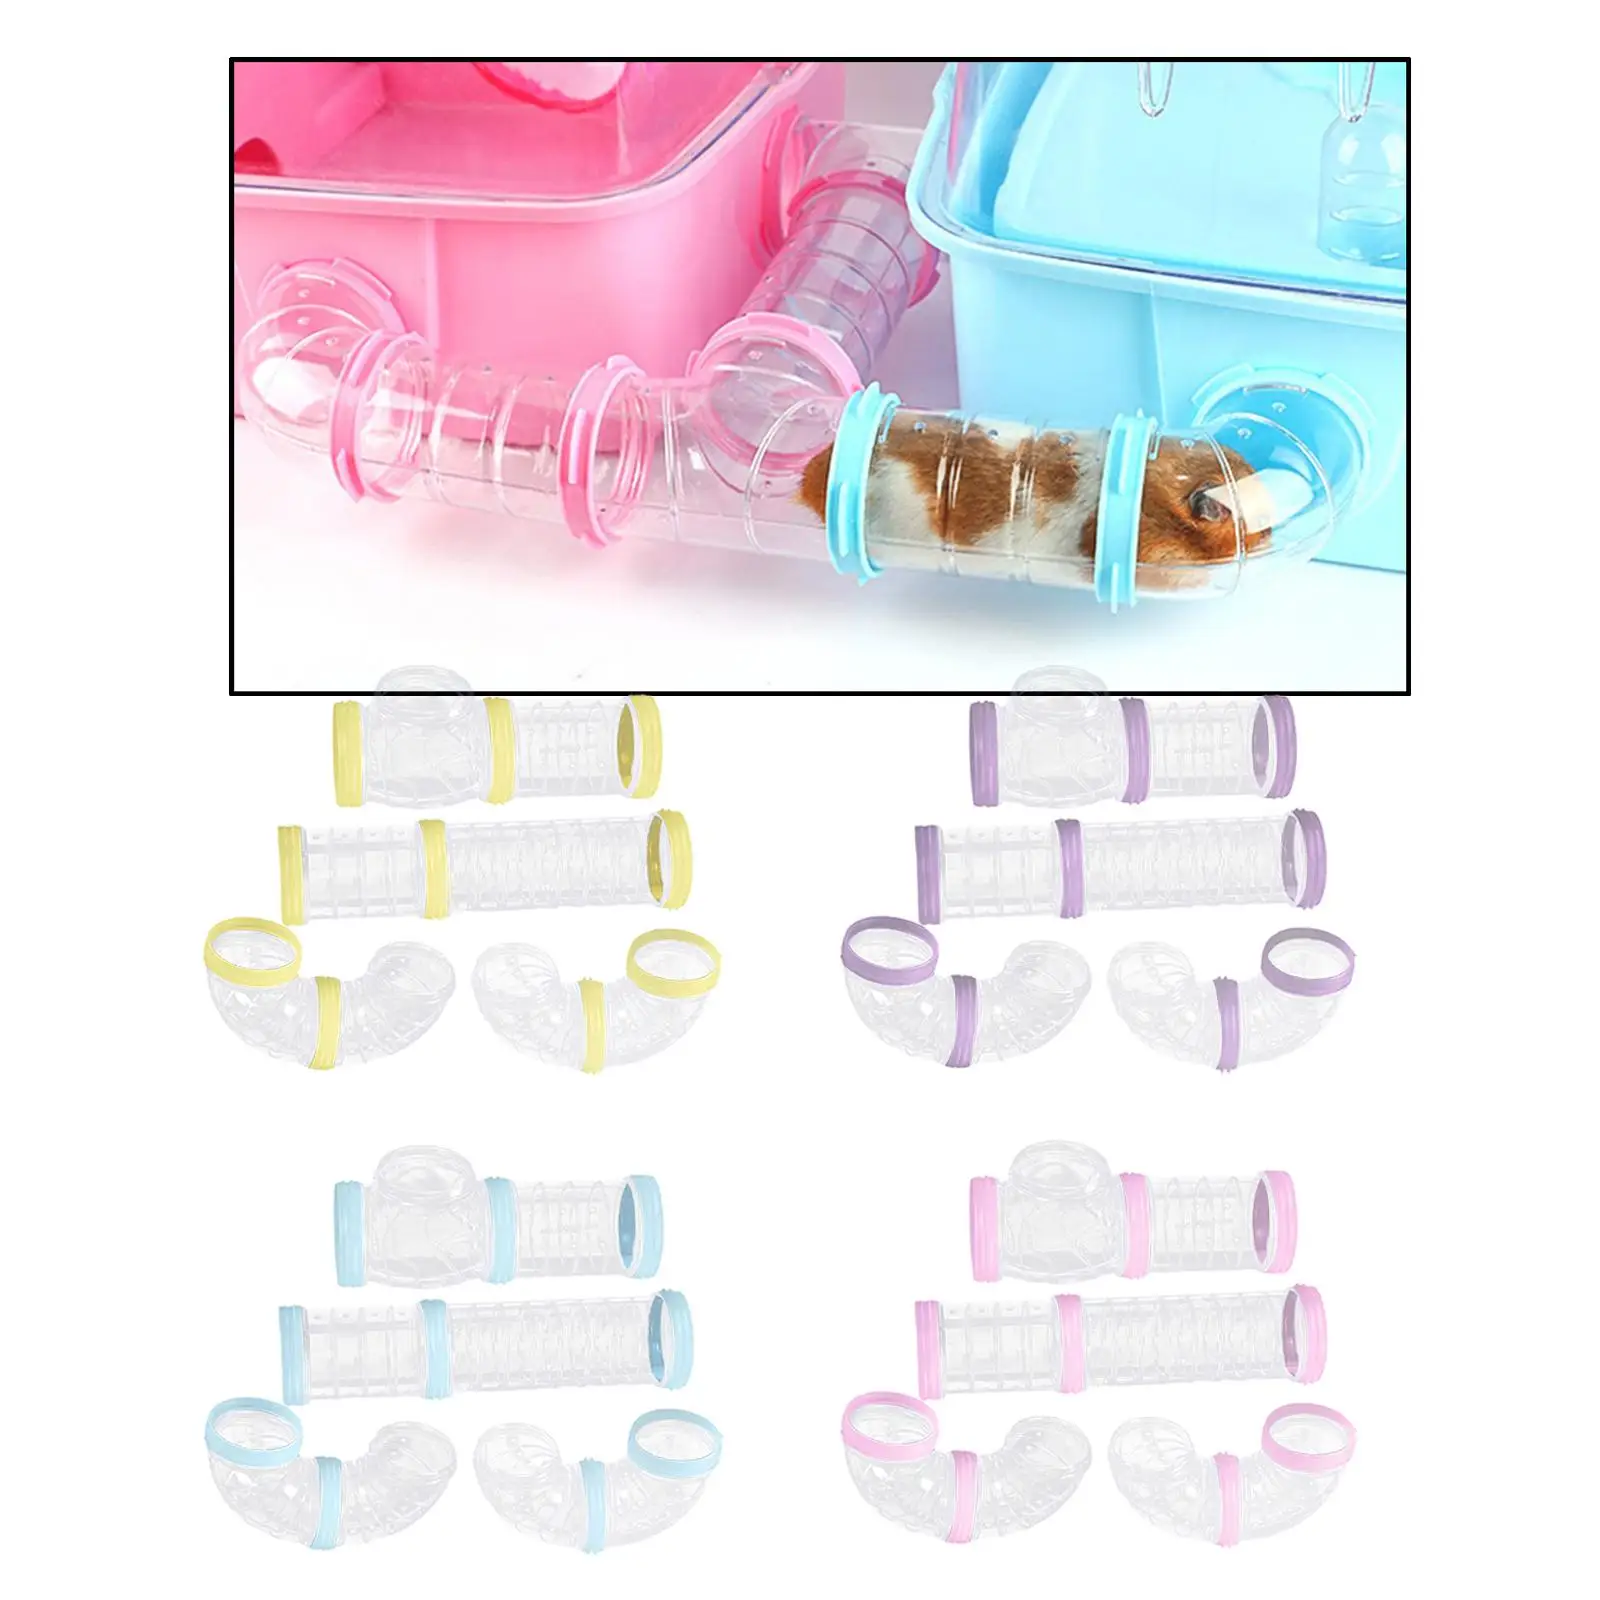 8 Pieces Multifunctional Hamster Tubes Set Connection Tunnels for Small Pets